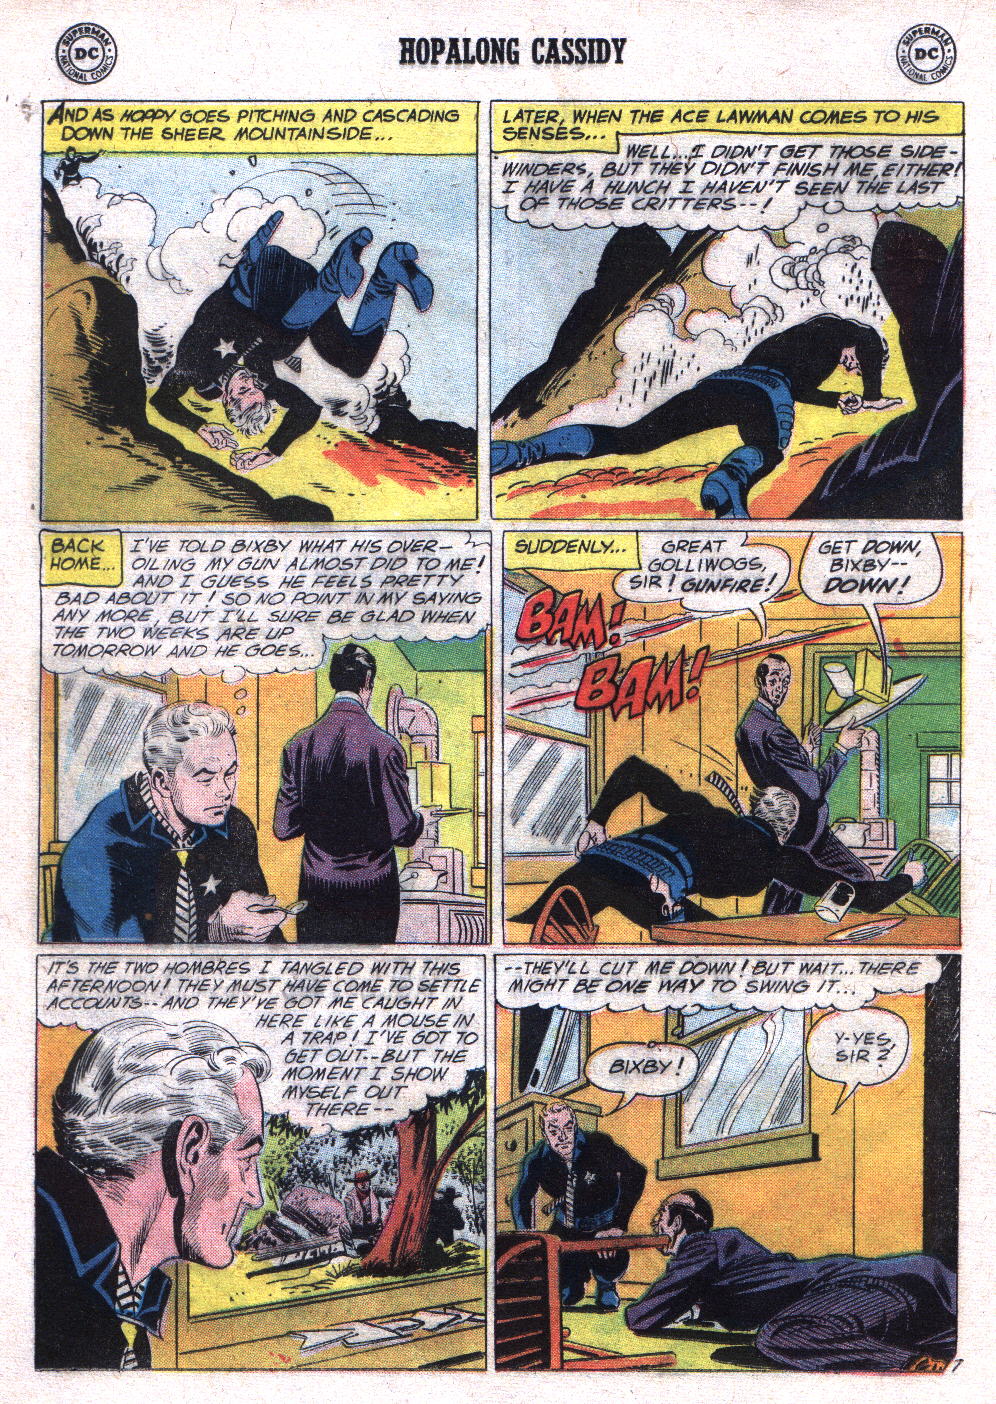 Read online Hopalong Cassidy comic -  Issue #130 - 20